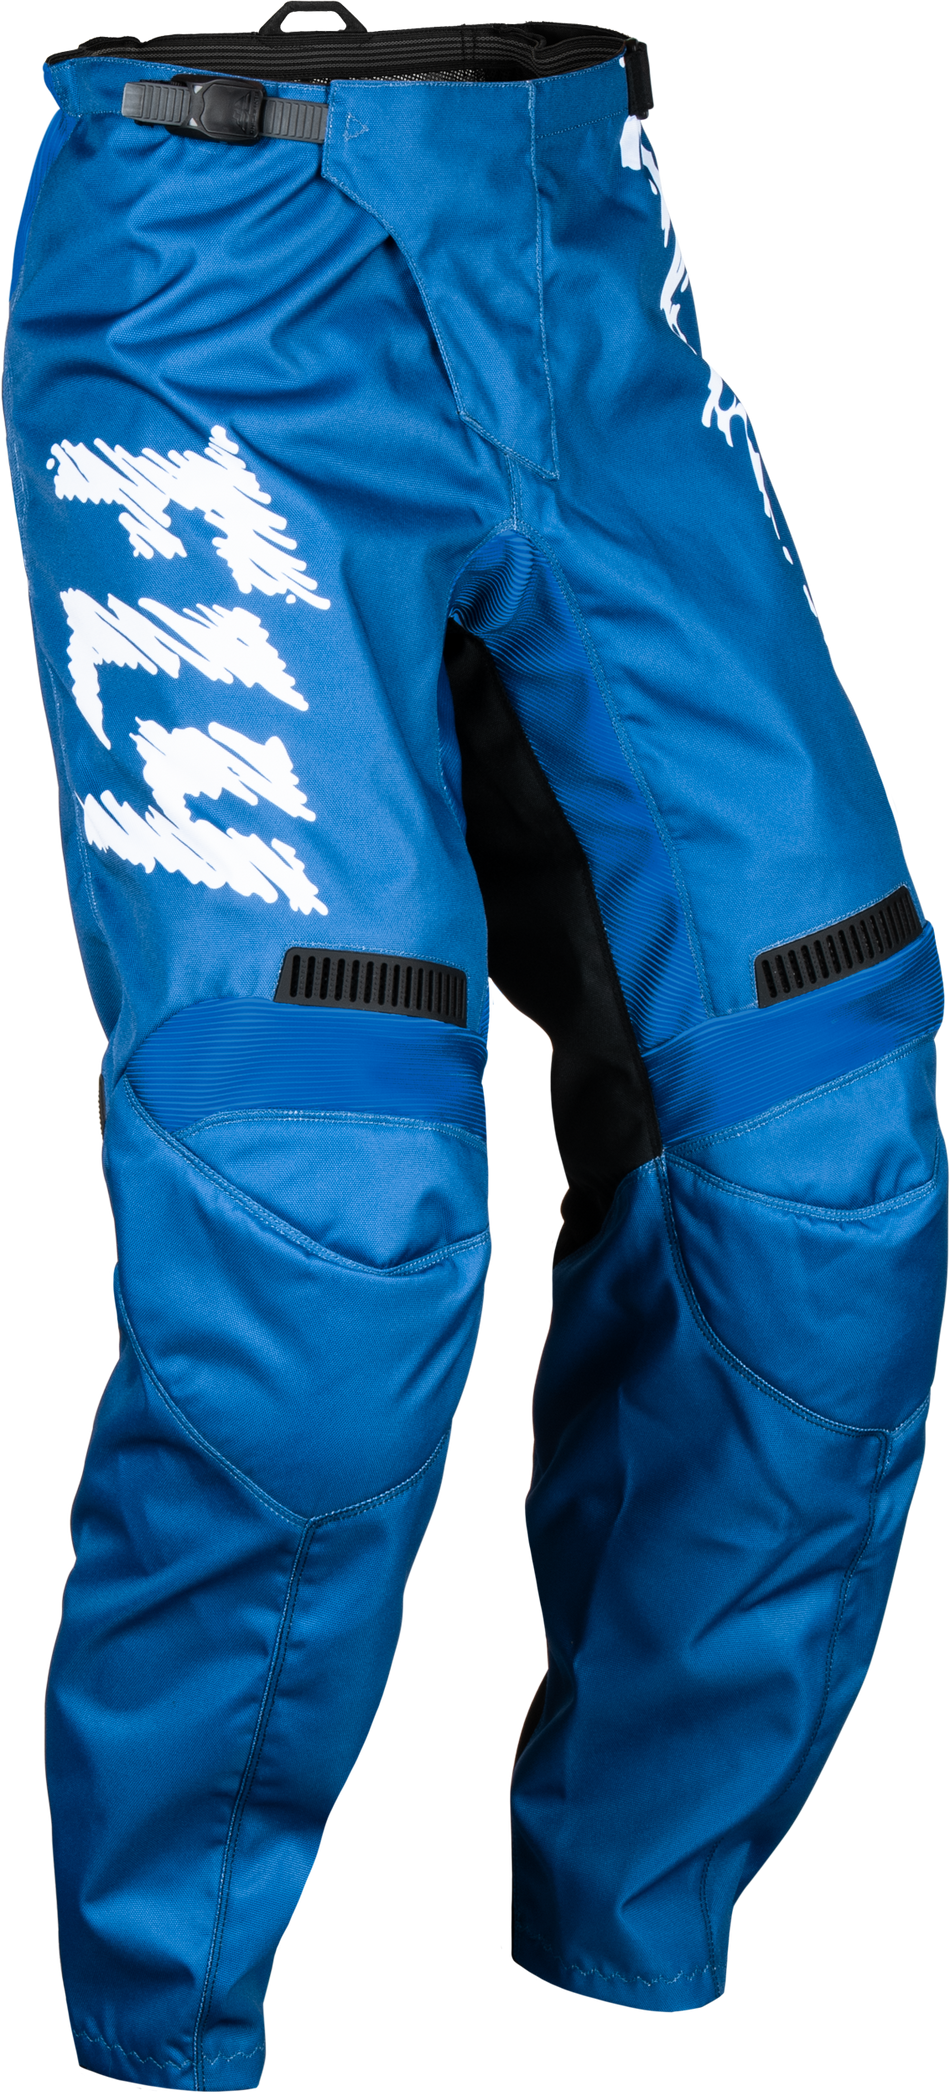 FLY RACING Youth F-16 Pants True Blue/White Sz 26 377-23326